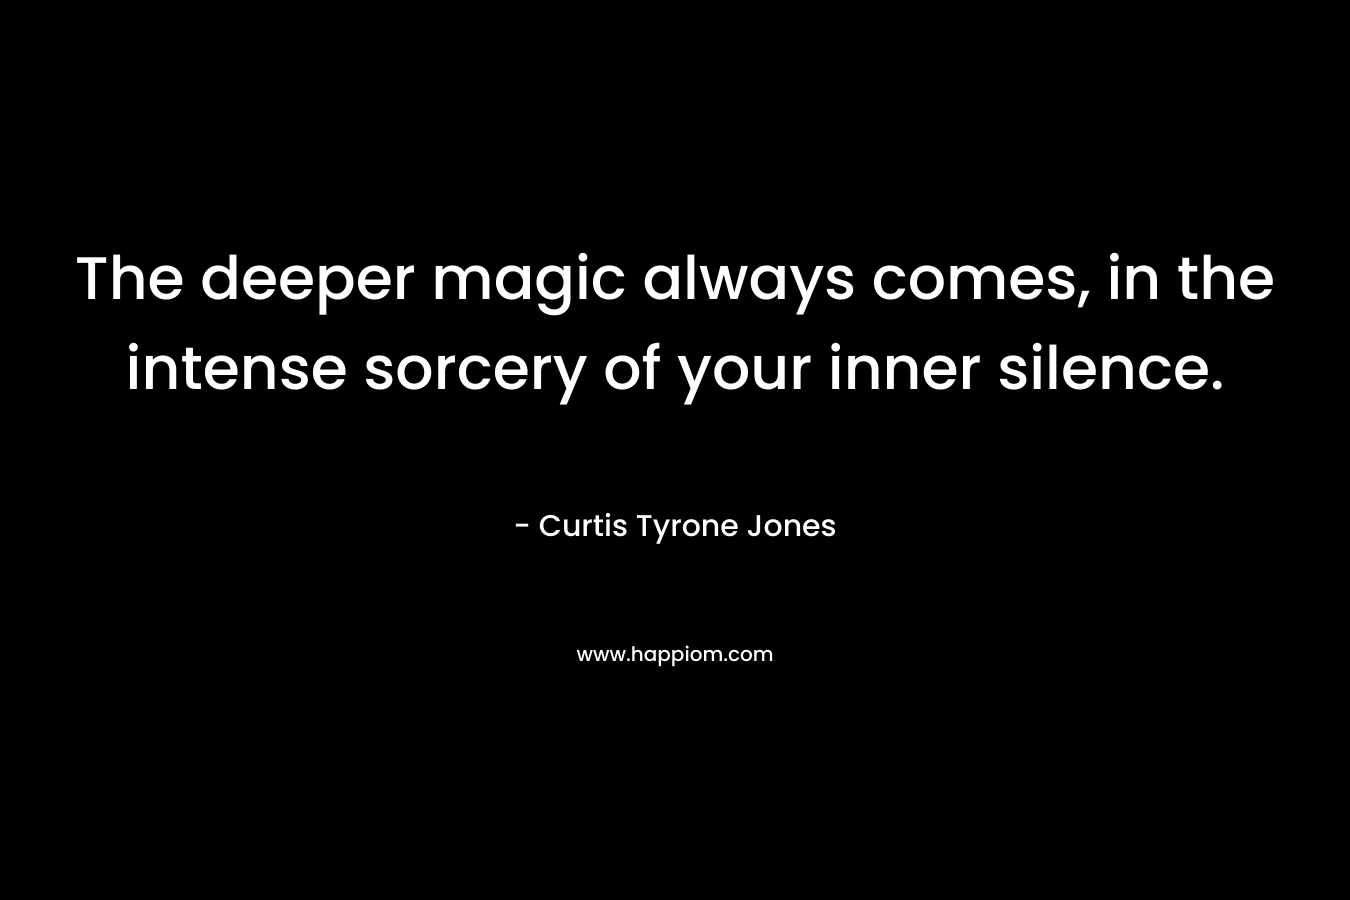 The deeper magic always comes, in the intense sorcery of your inner silence.